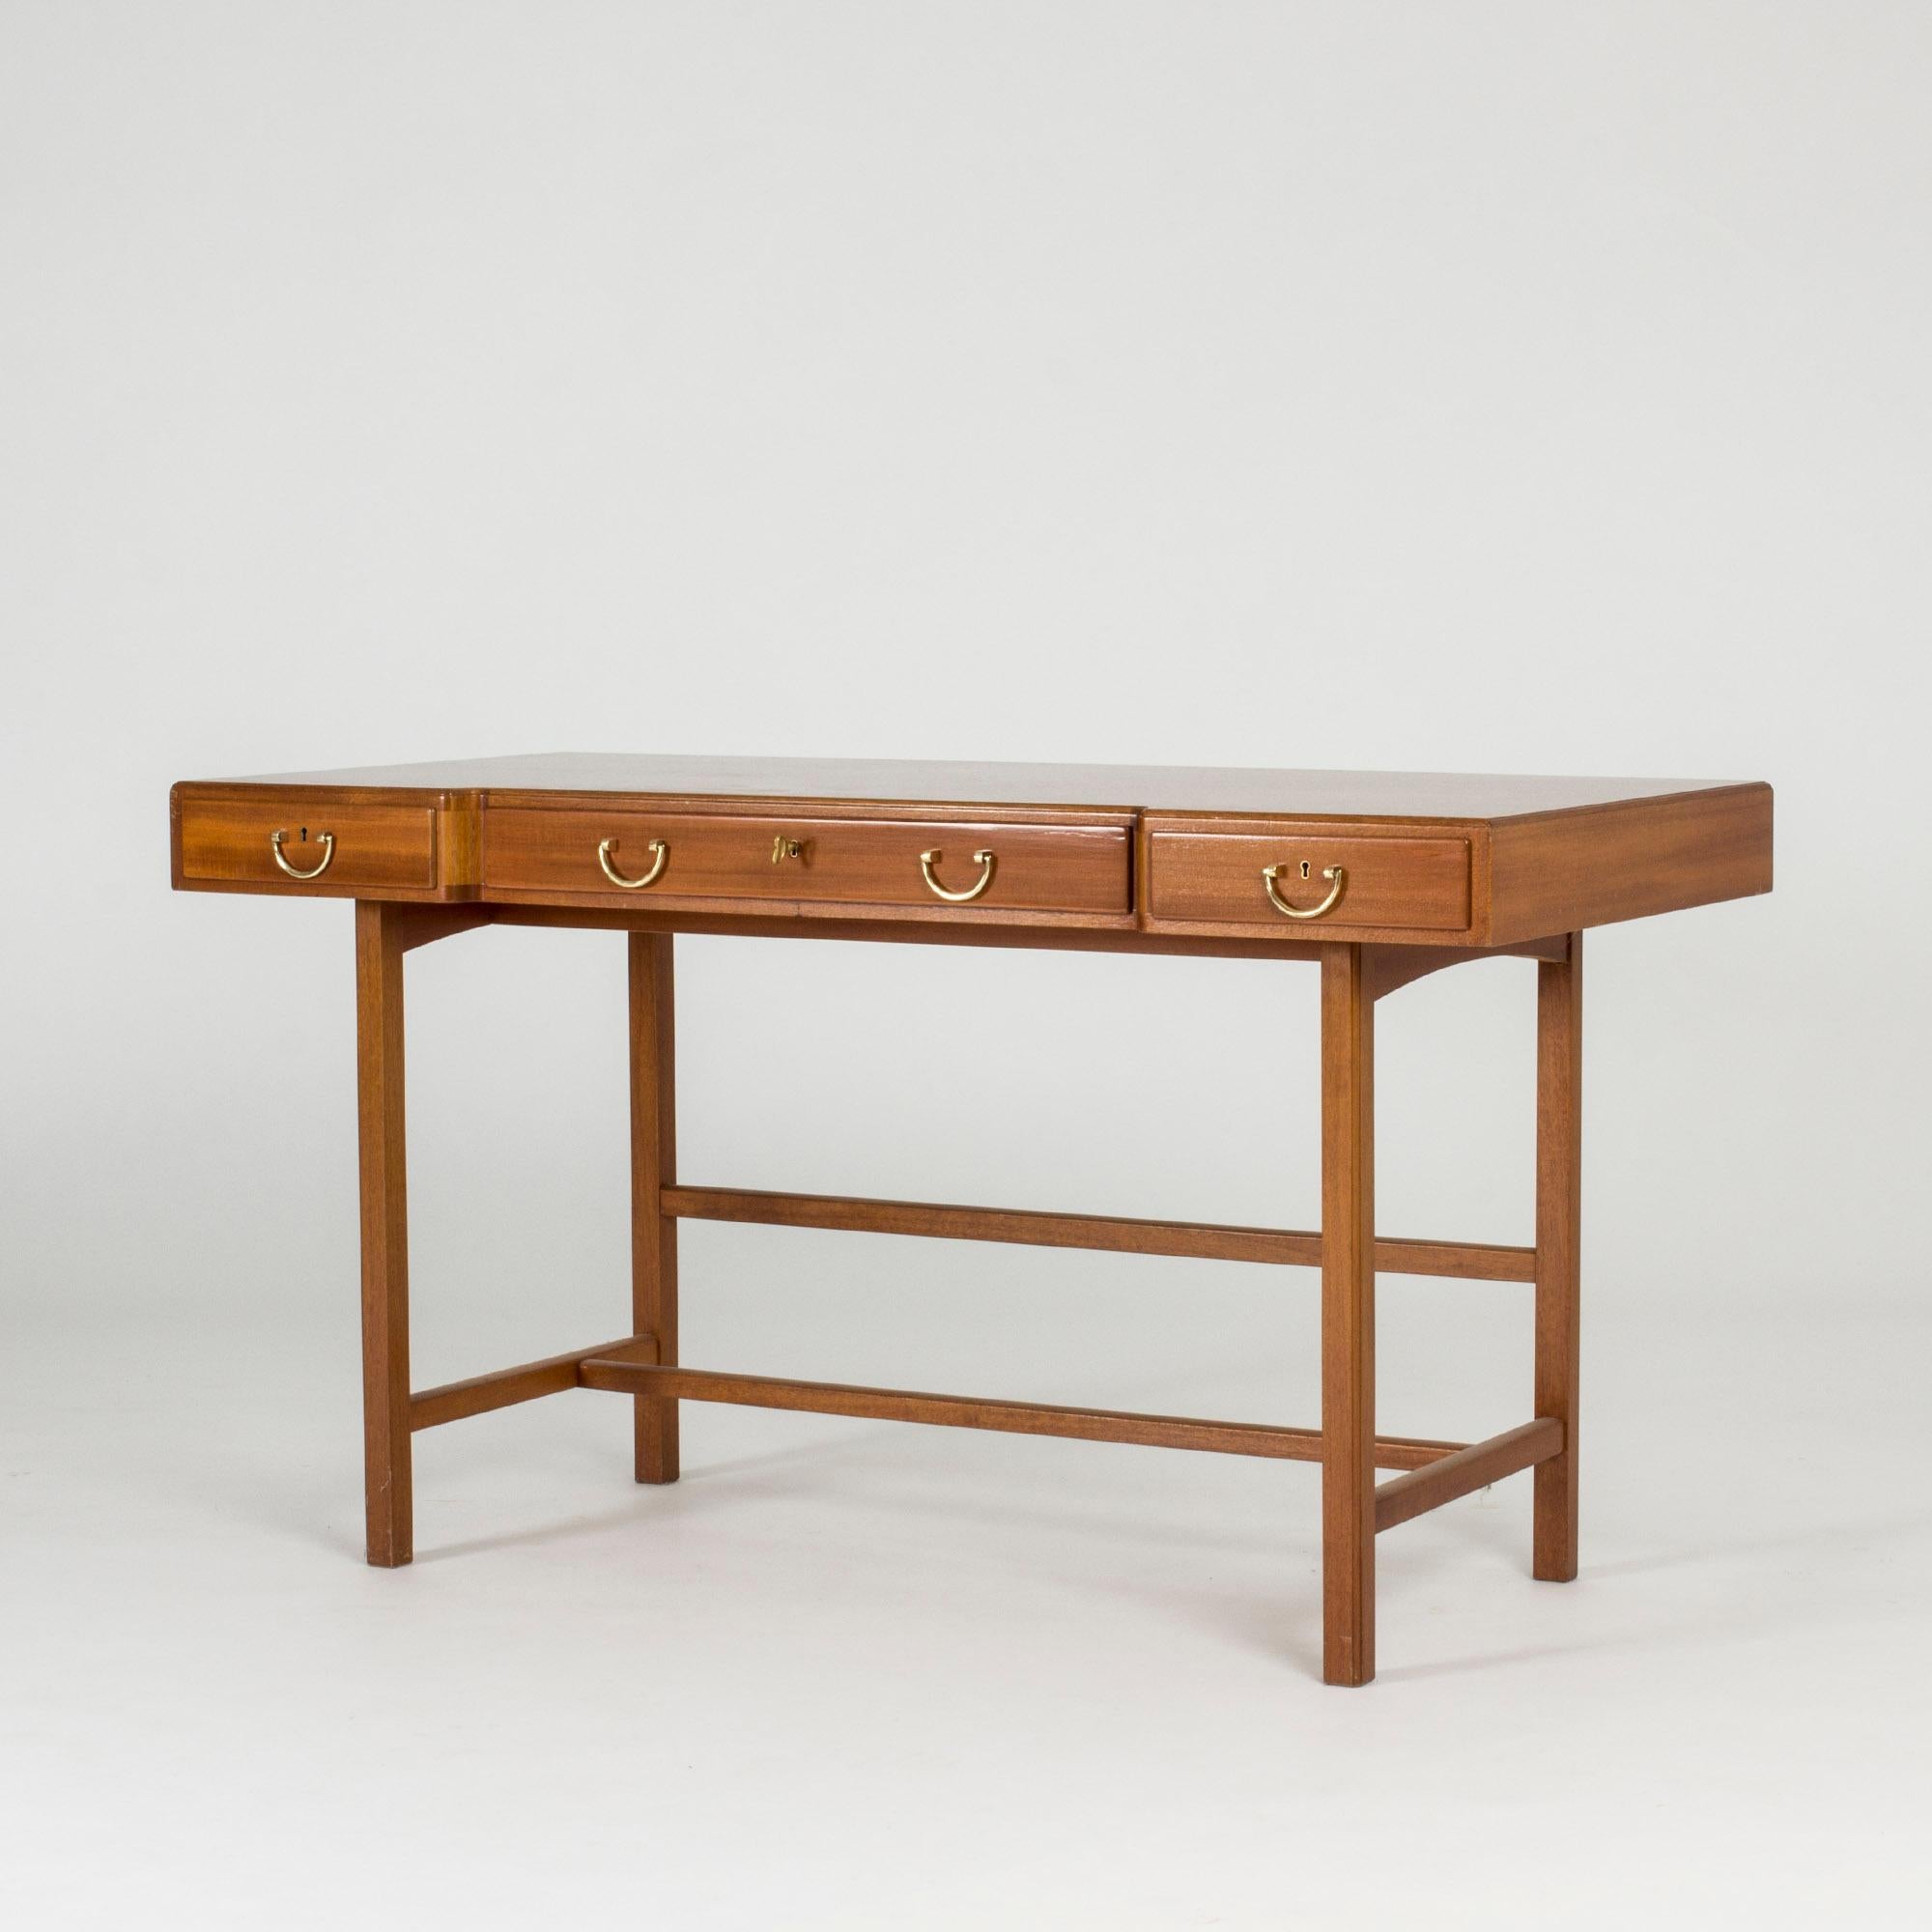 Elegant mahogany desk by Josef Frank with an inlaid stripe of contrasting wood around the edge of the tabletop. Neat row of shallow drawers gives the desk a light expression. Called “Schatull-skrivbordet”.